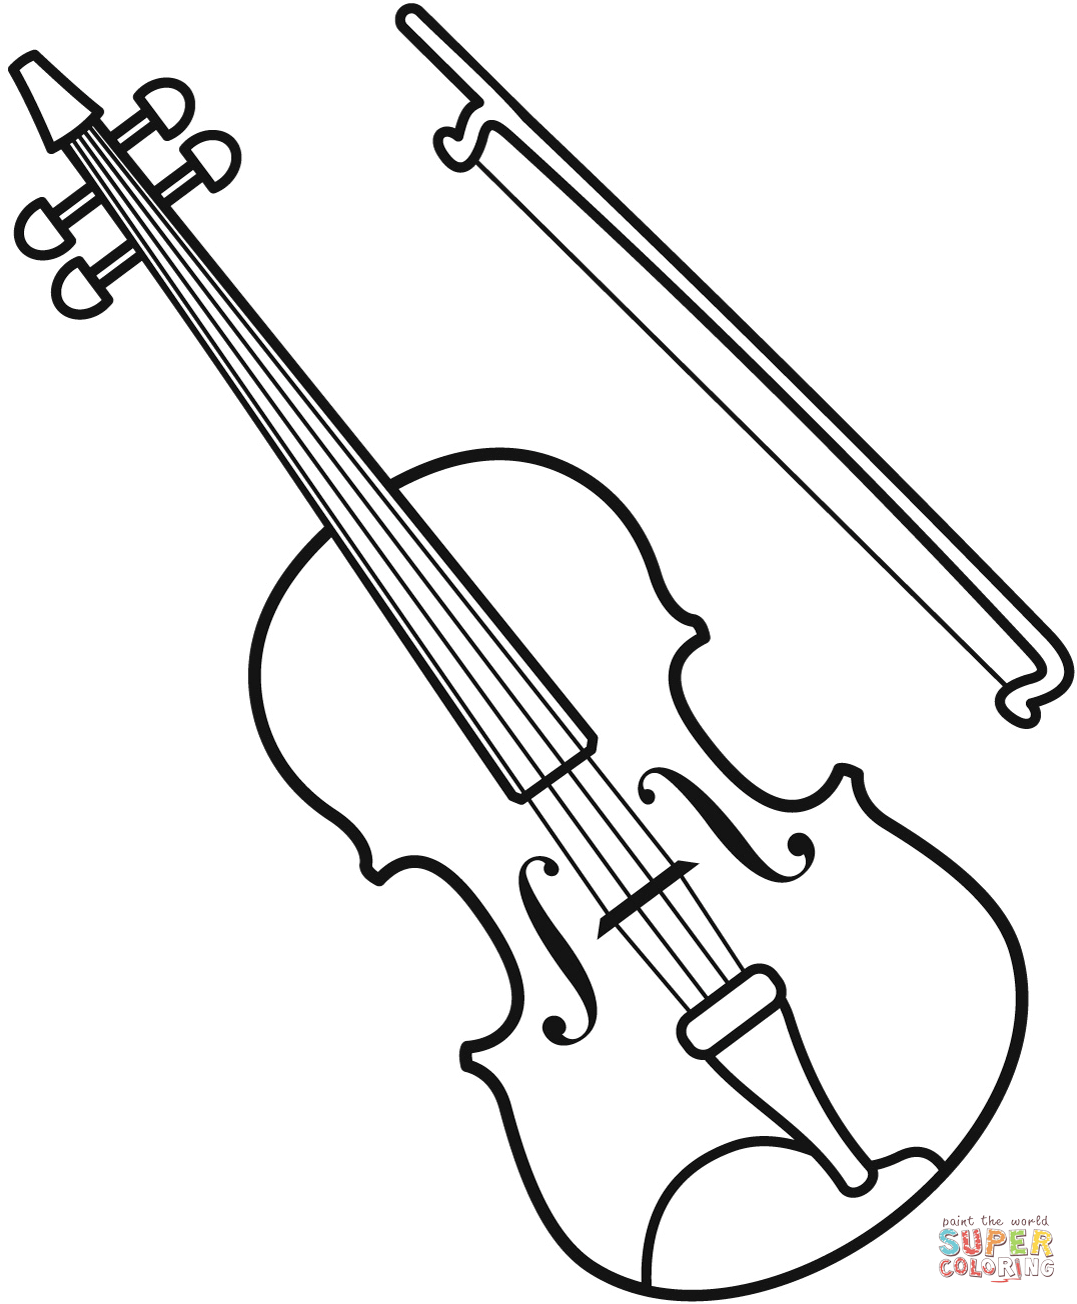 Violin coloring page free printable coloring pages